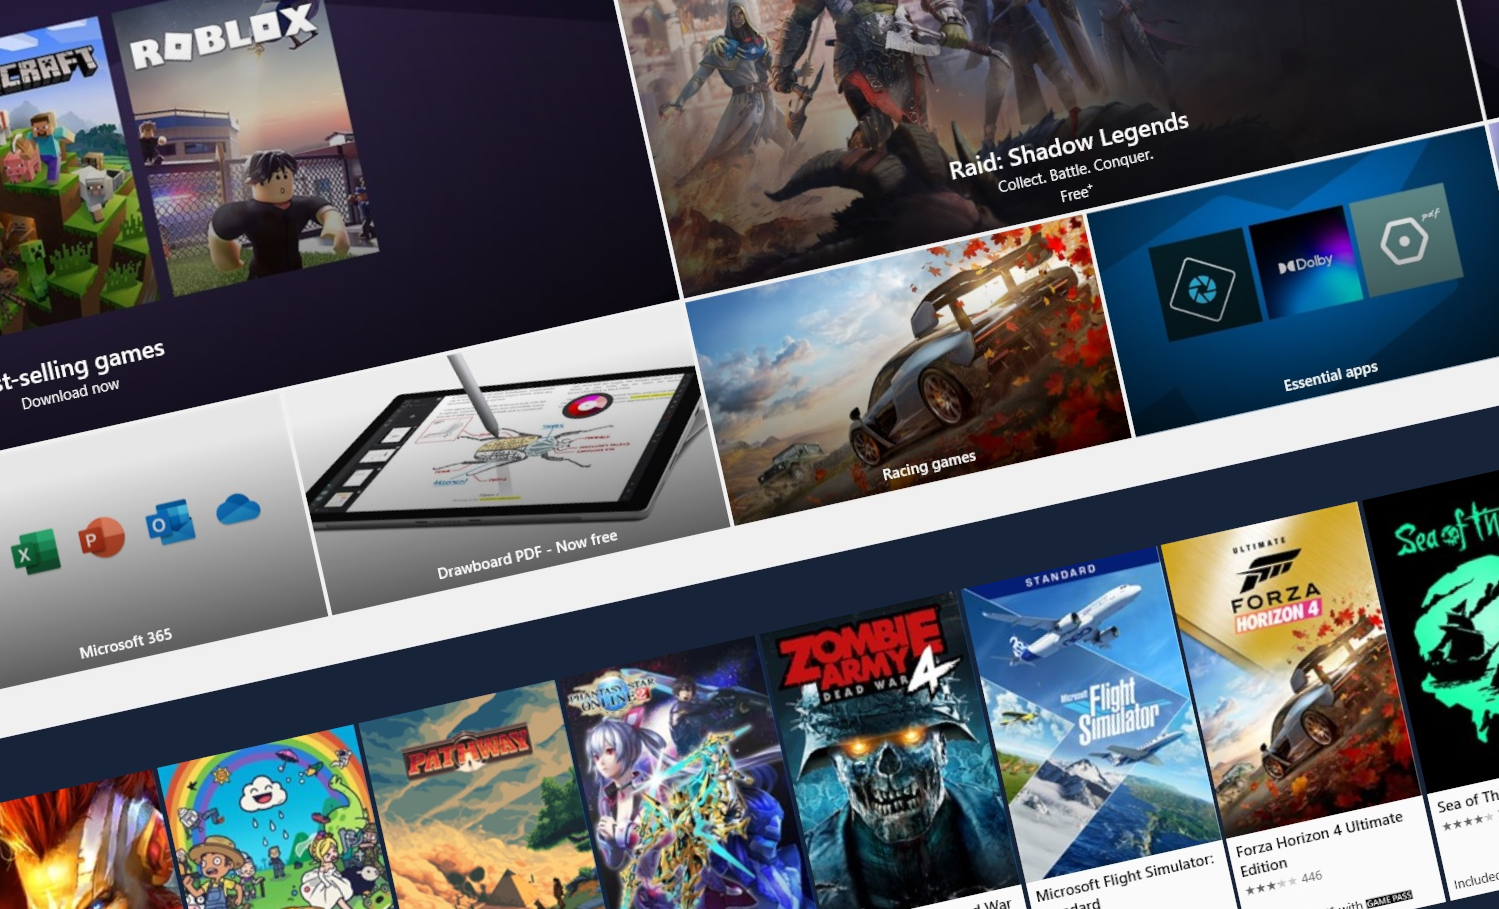 Epic Games Store fights dirty with Steam: Allows developers to